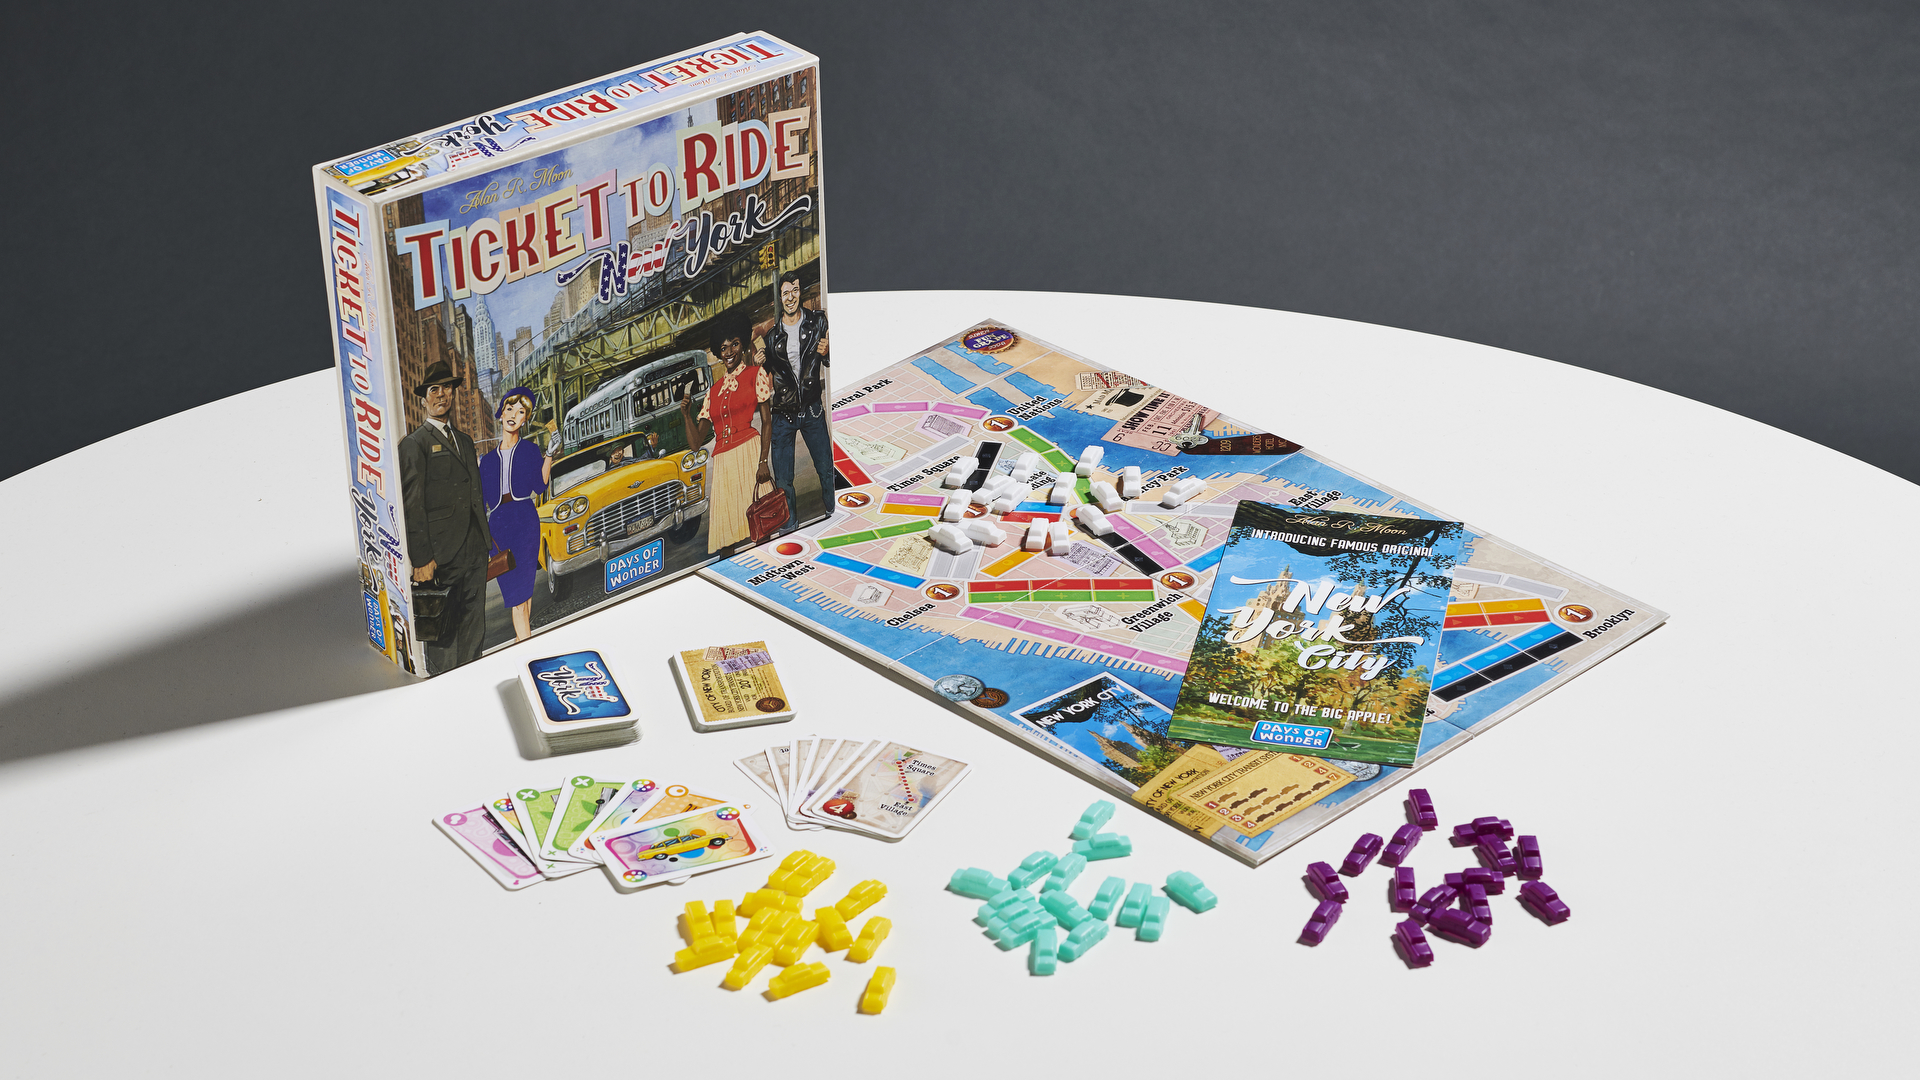 Ticket To Ride